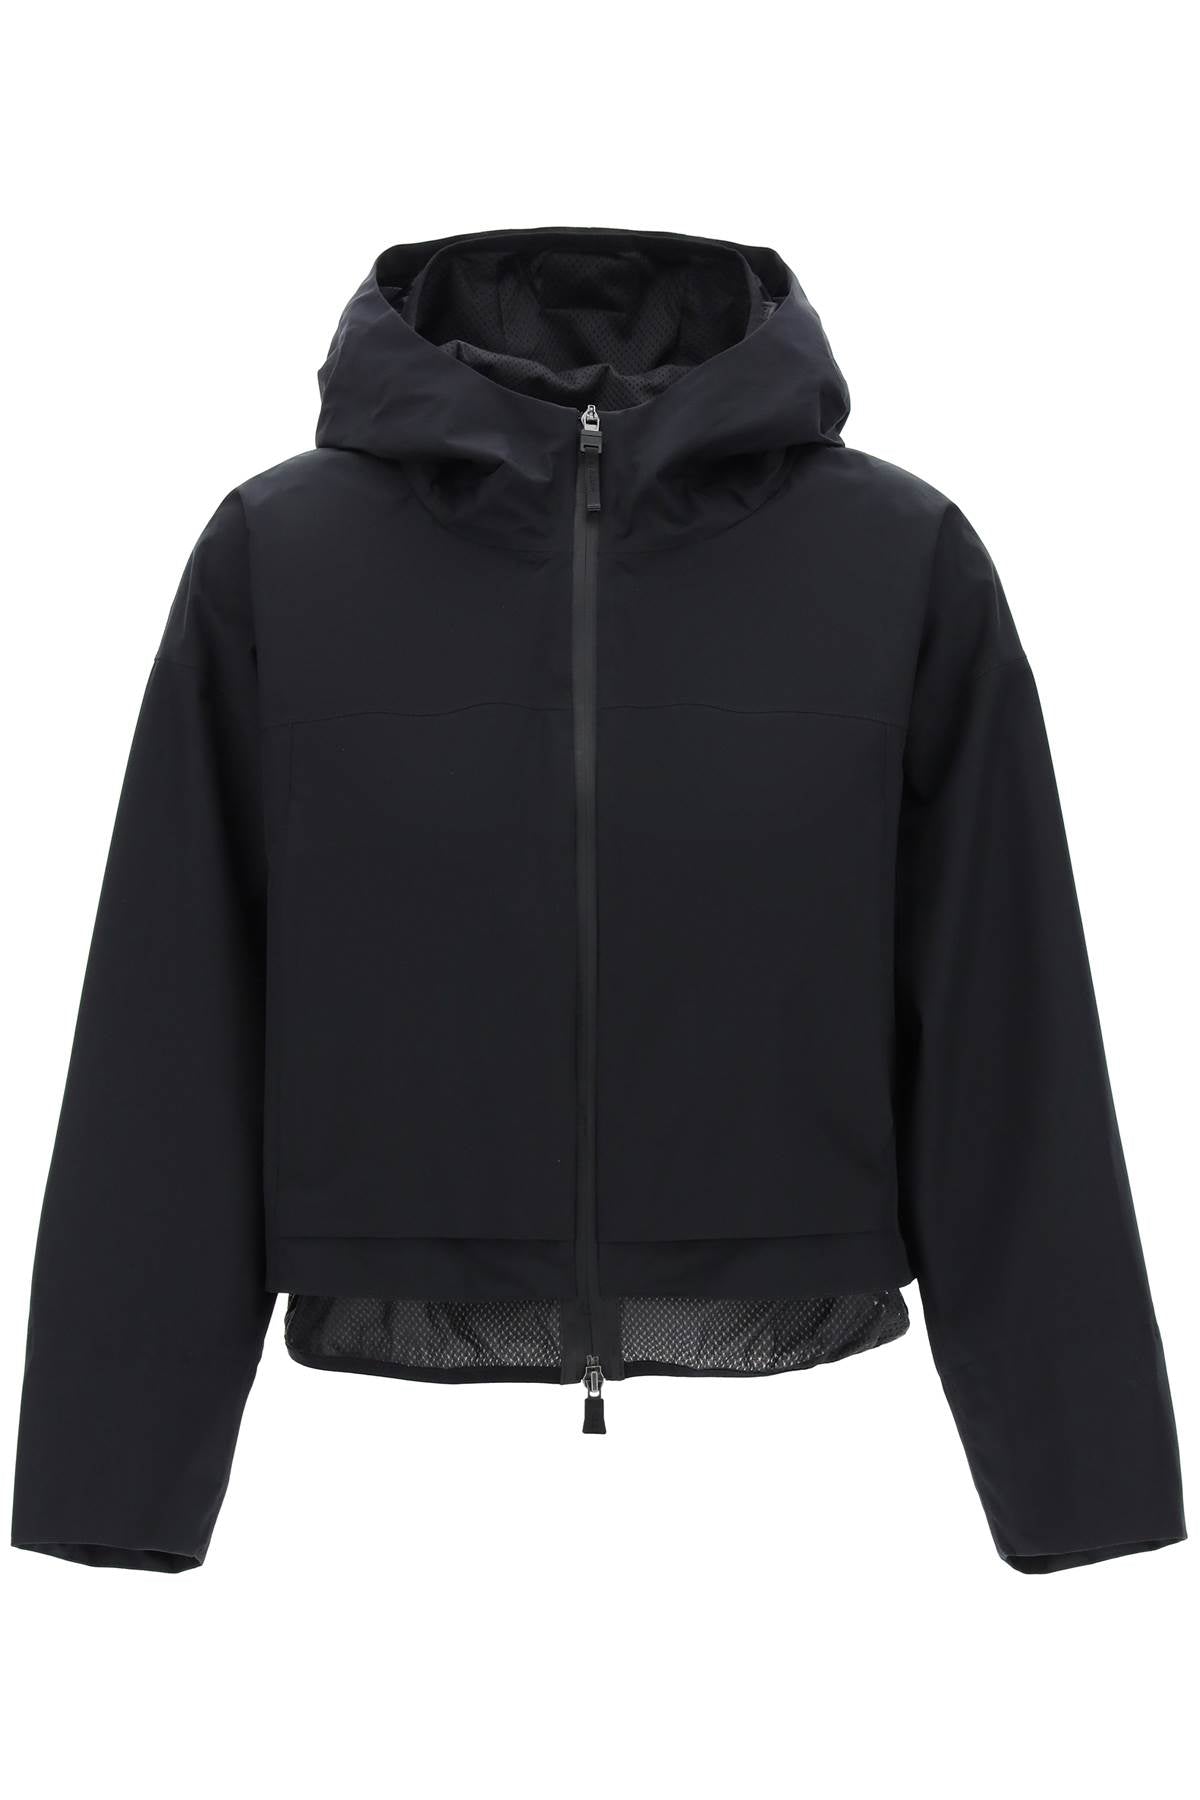 HERNO Women's Black Cappuccio Hooded Jacket in Gore-Tex Infenium Fabric for Spring/Summer 2024